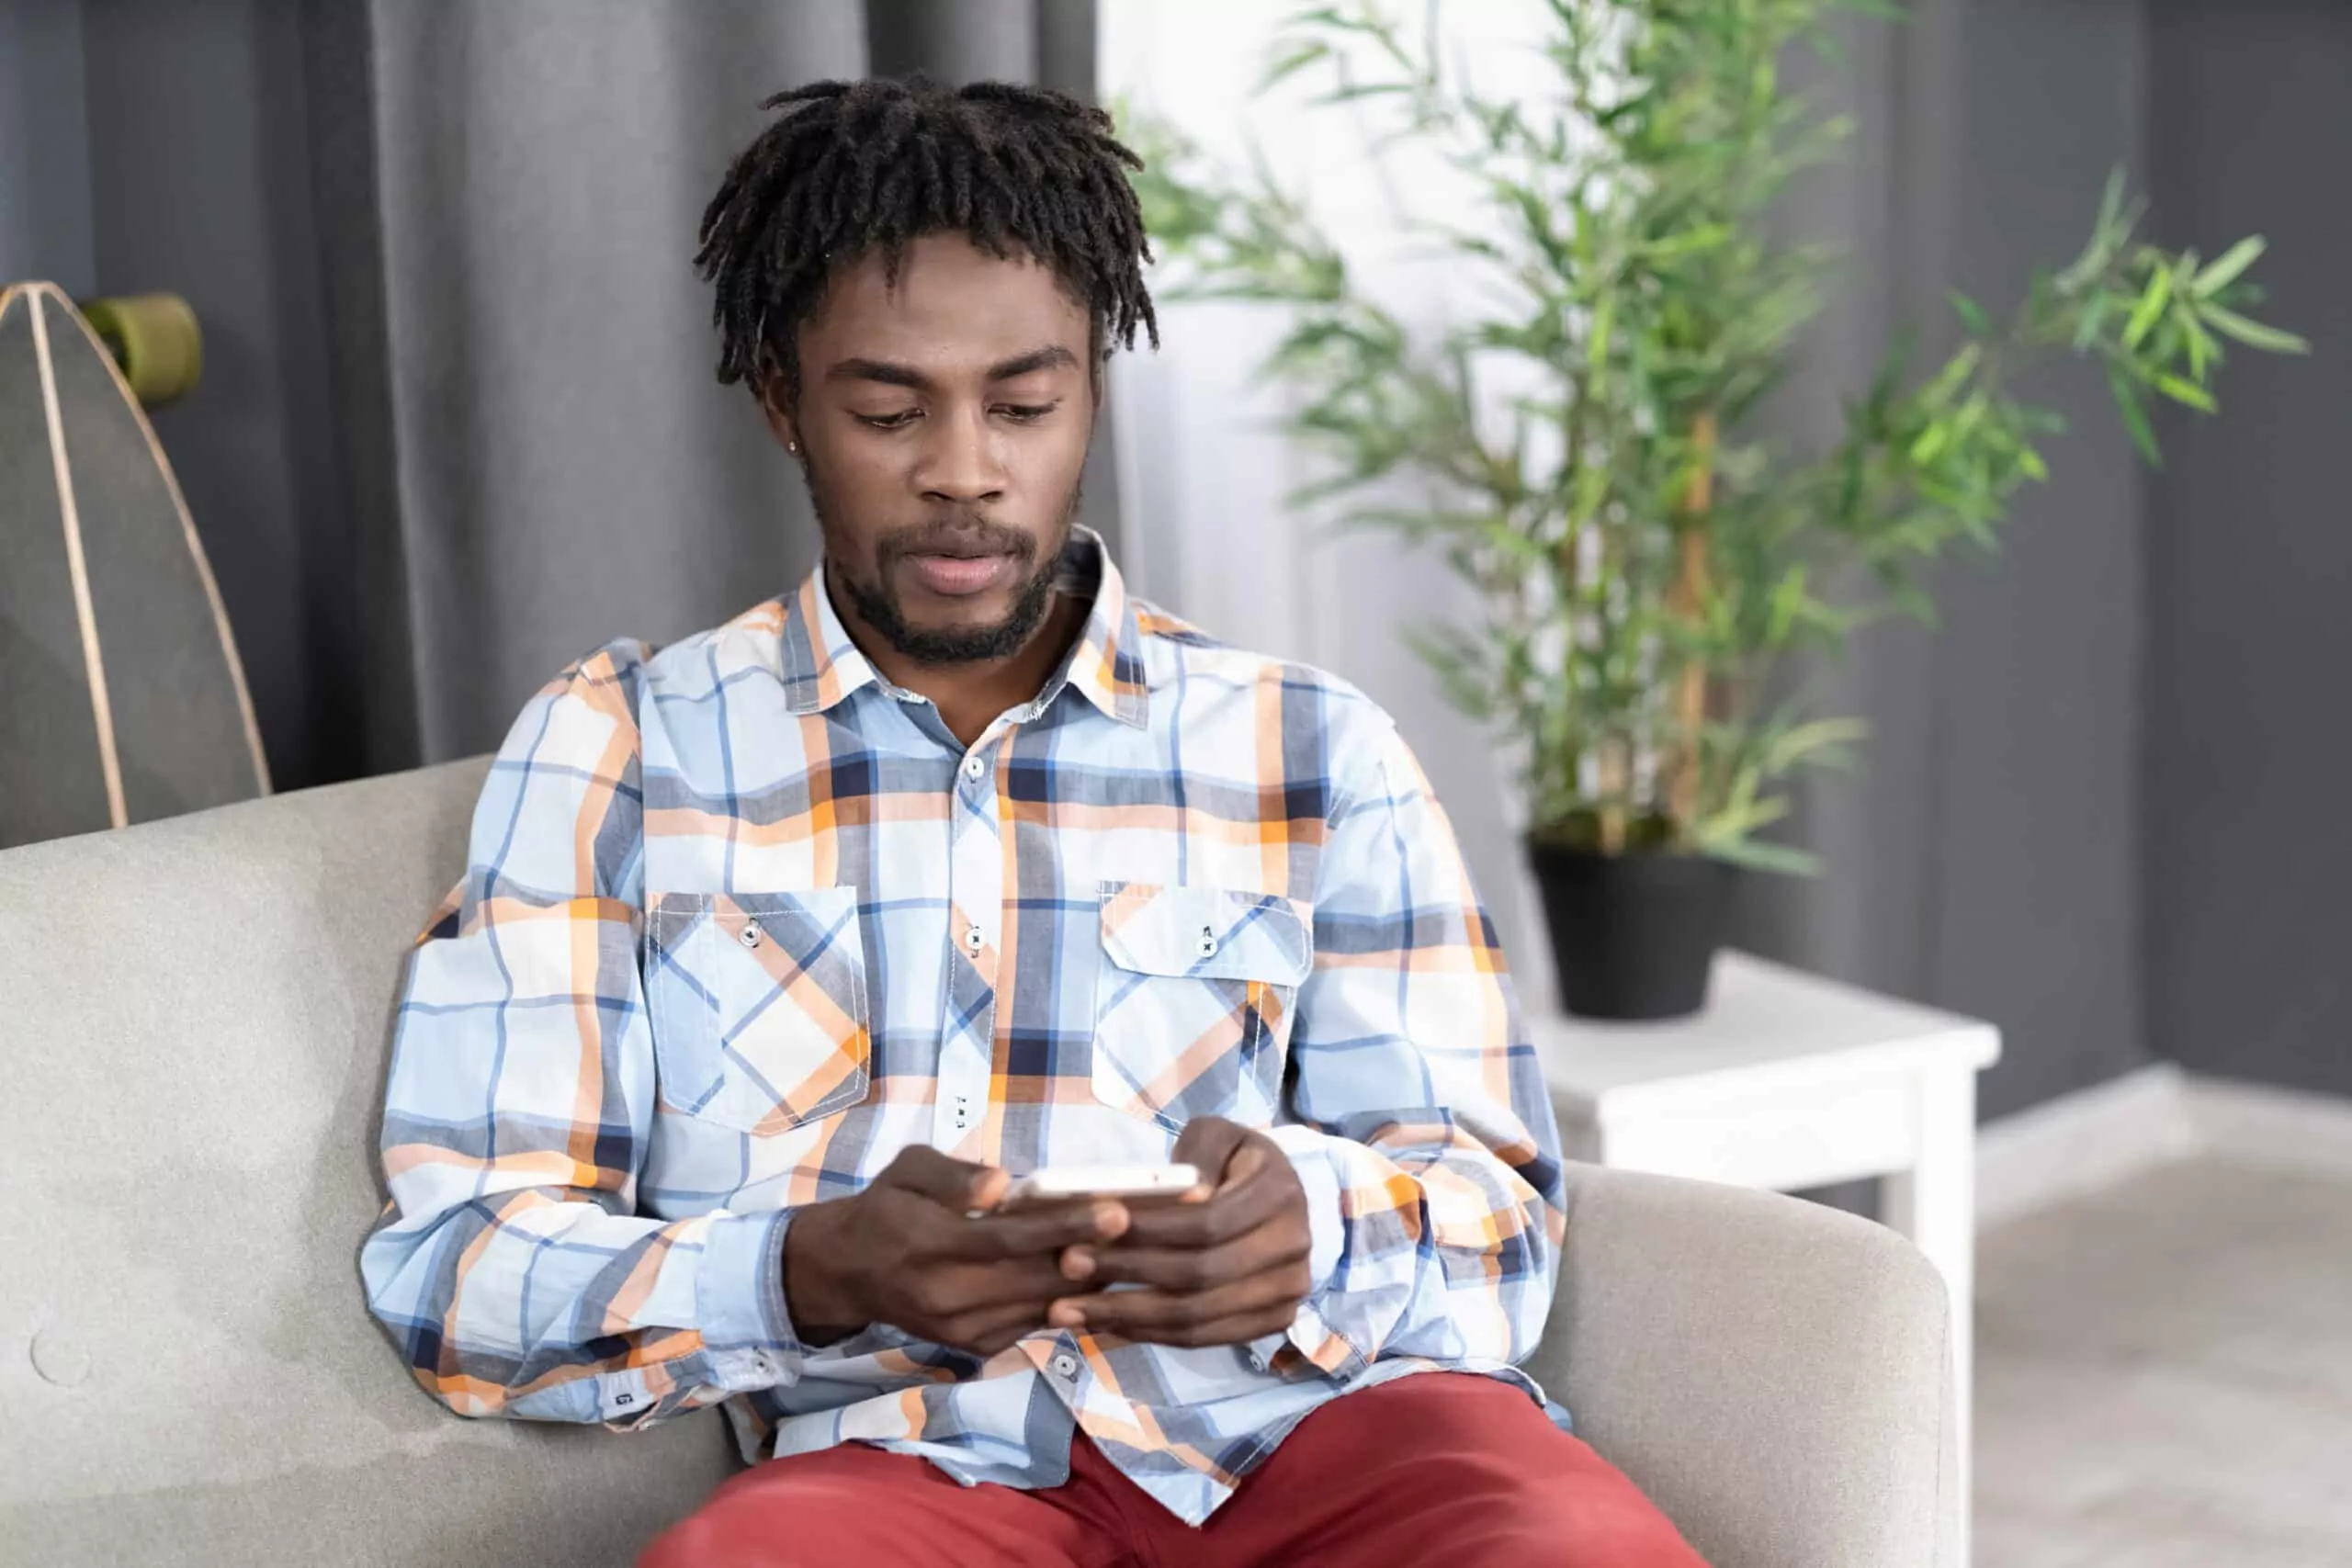 concentrated or interested african american man use smartphone checking social media or updating information. portrait of young man holding smartphone sitting on the sofa. social media concept